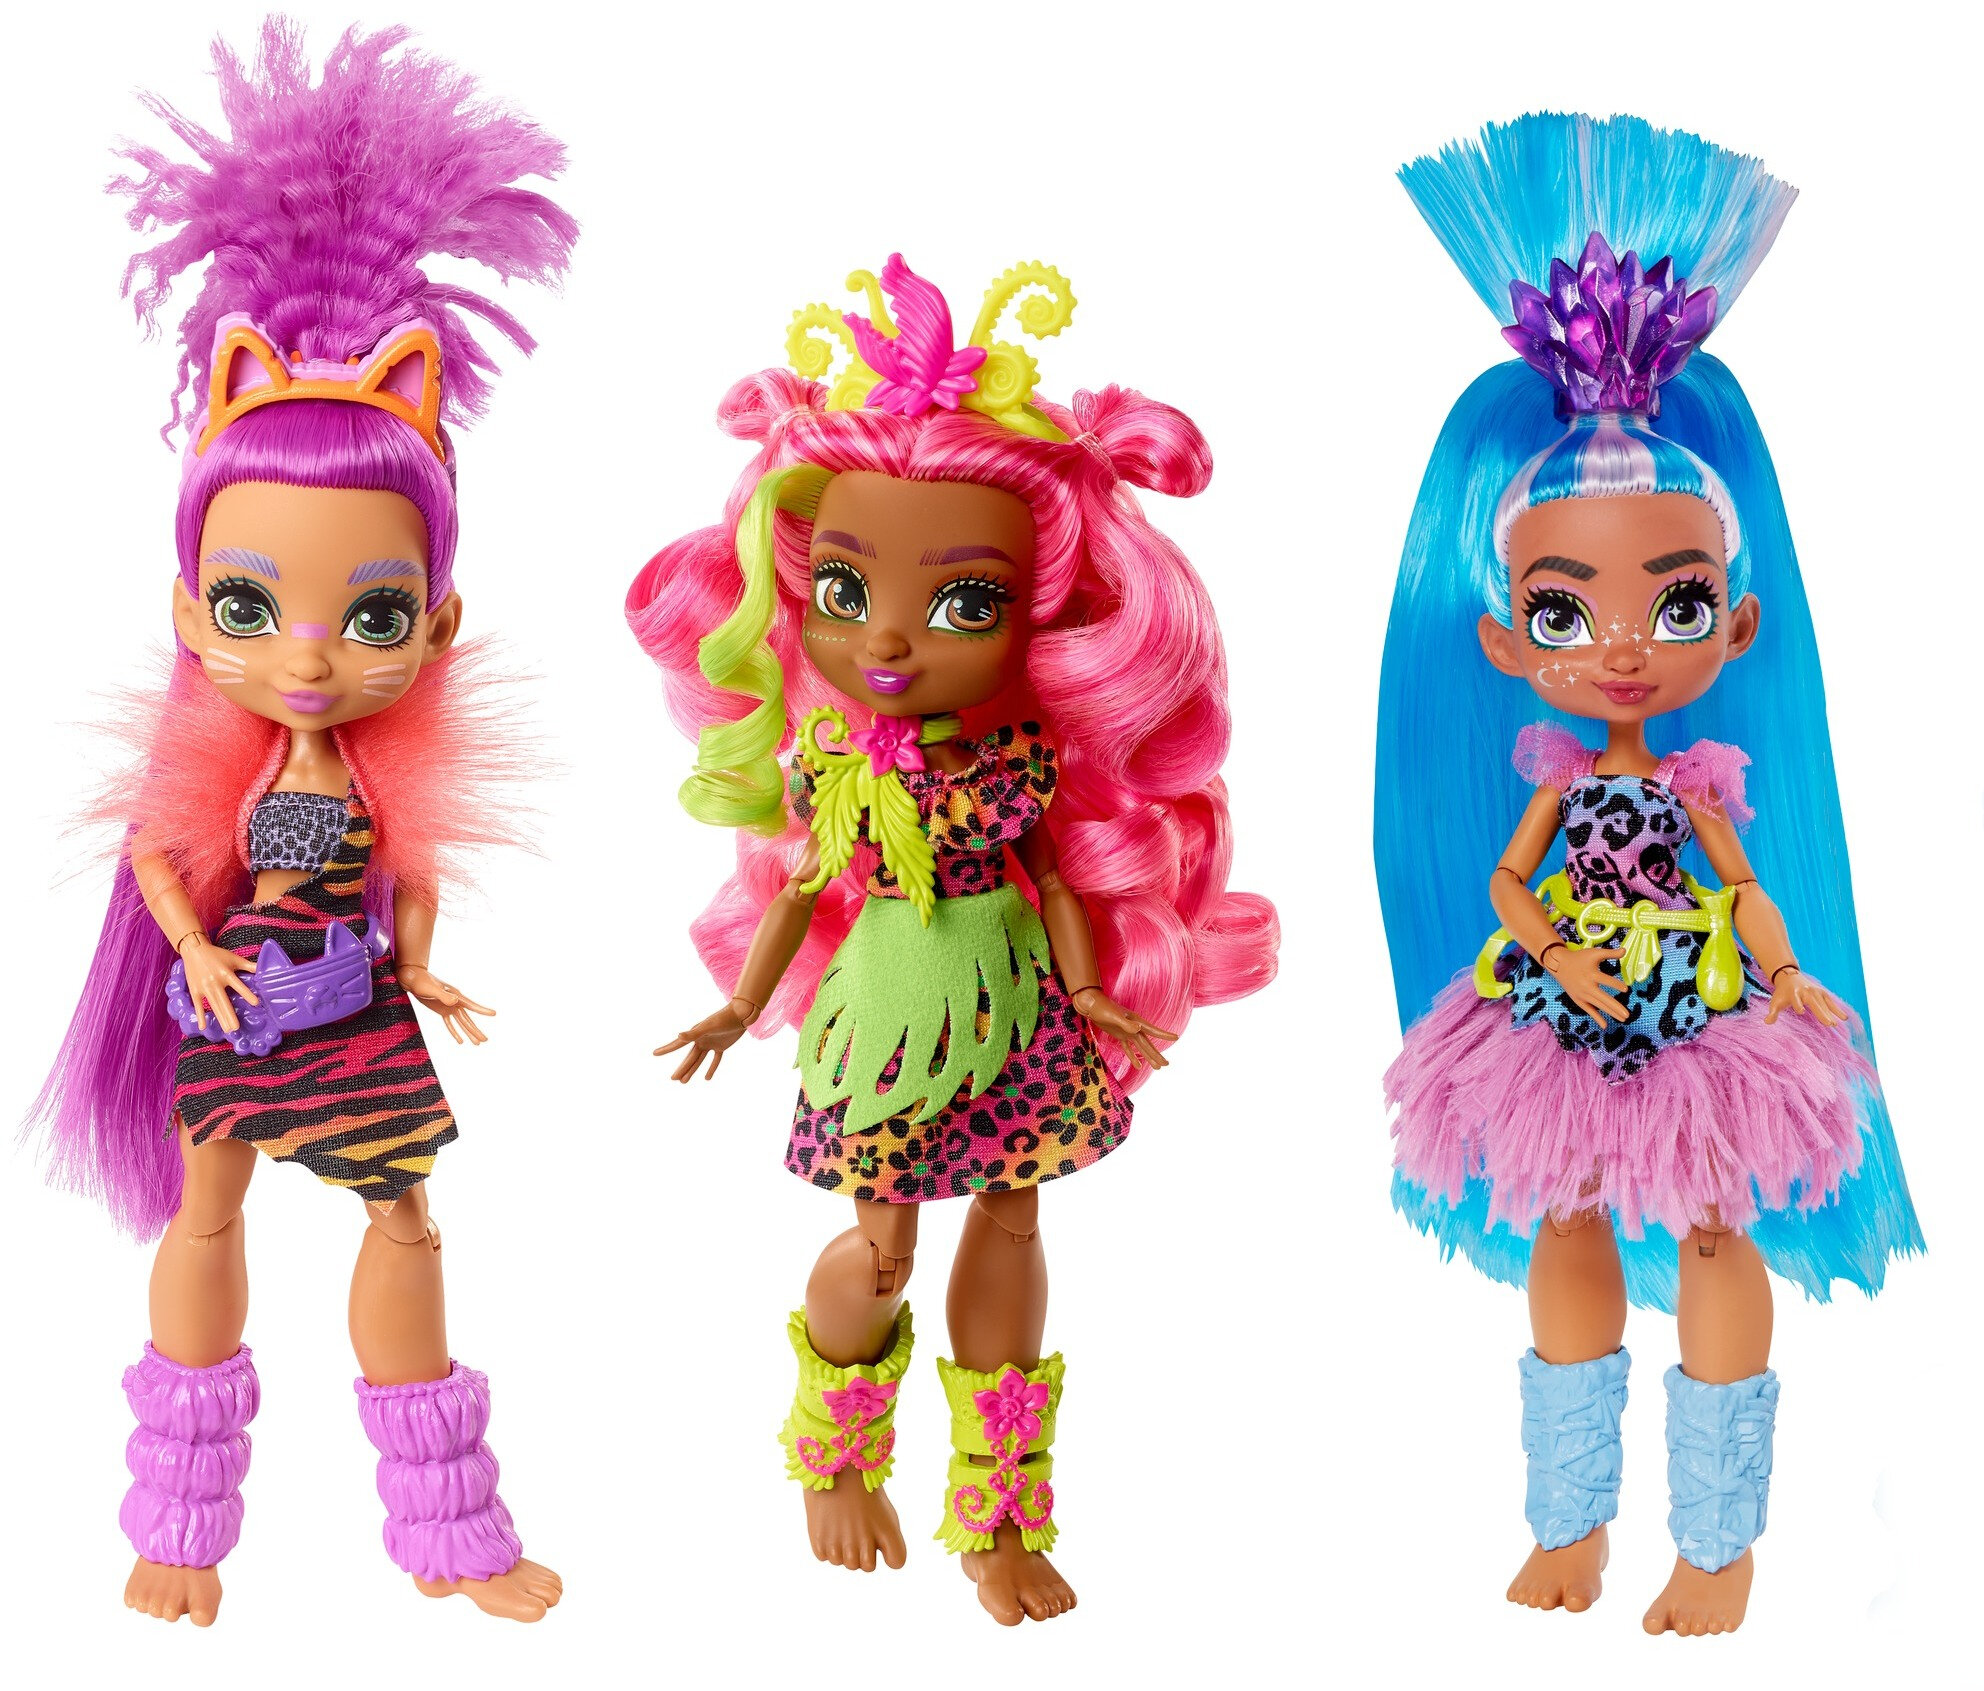 Cave Club Doll 3-Pack (10-inch) Poseable Prehistoric Fashion Dolls with Neon Hair - image 1 of 6